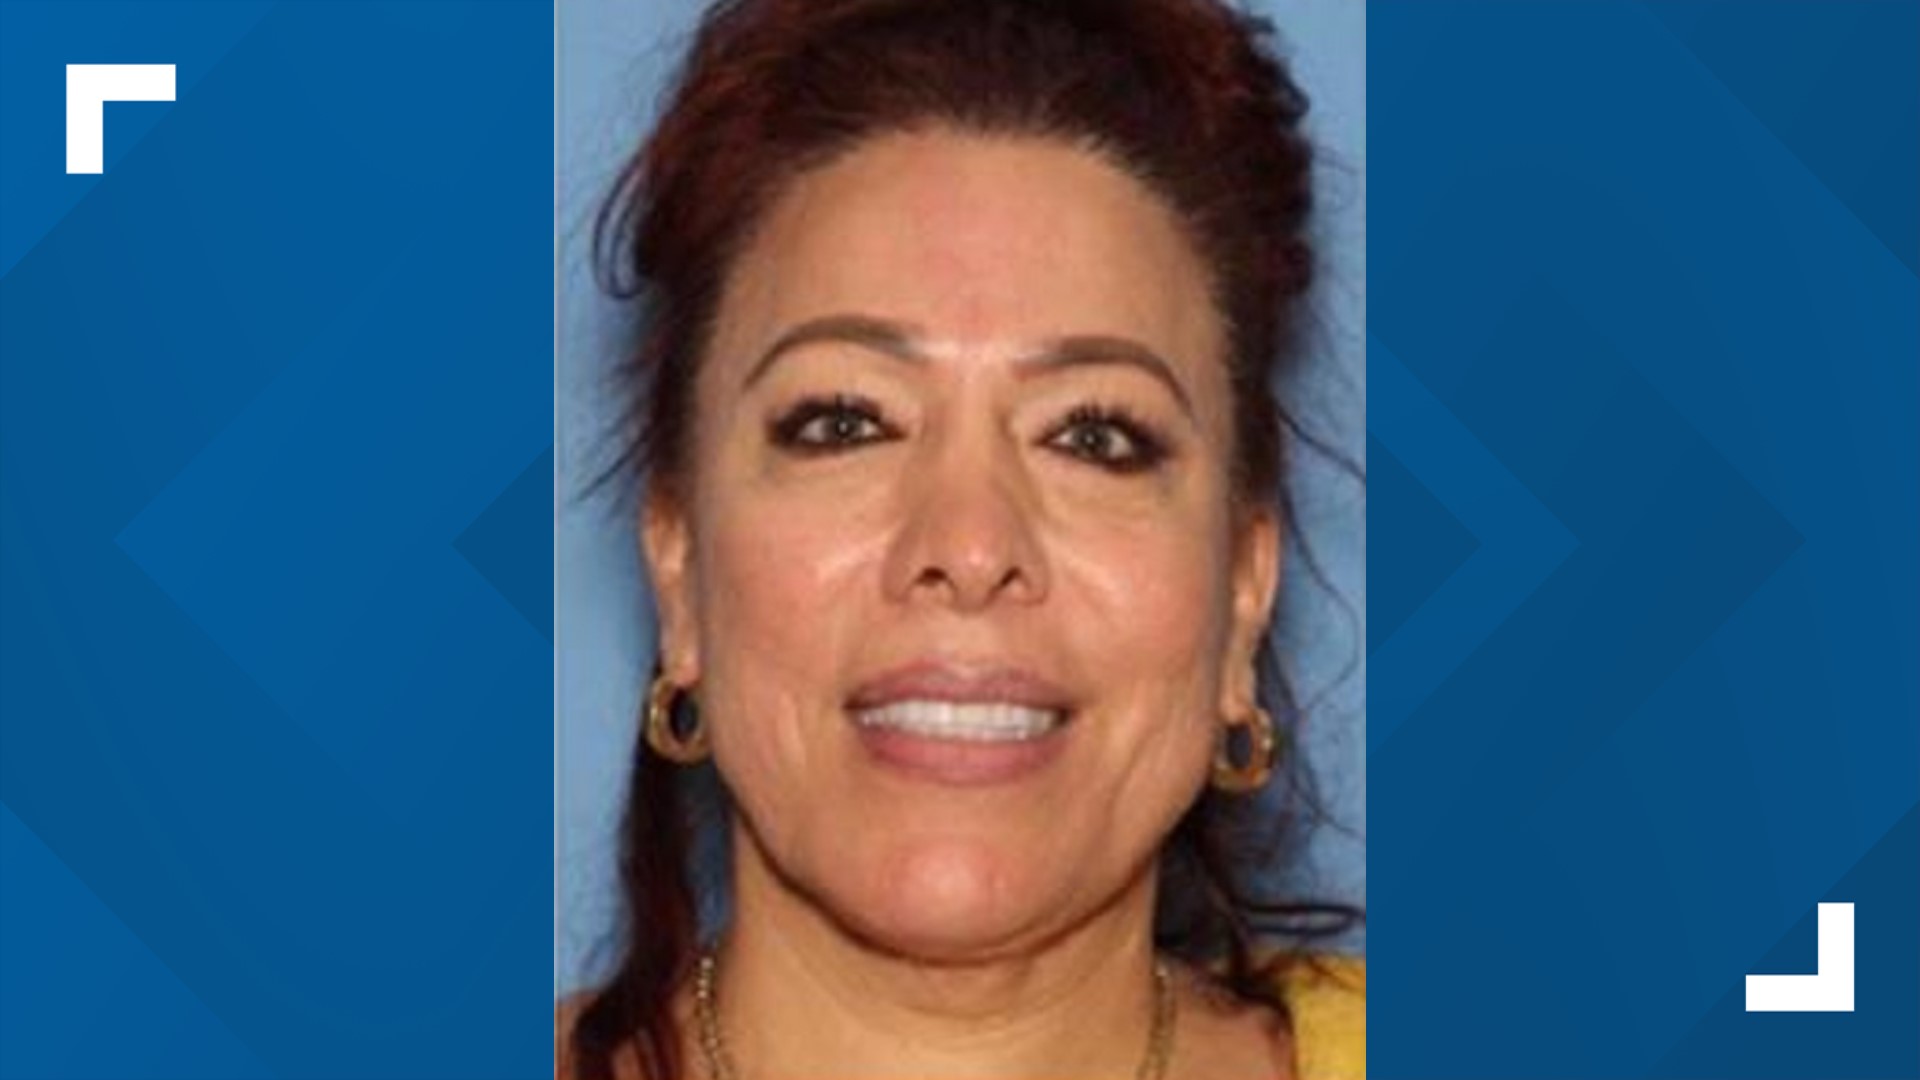 Police say Reyna Hernandez's body has been transferred to the King County Medical Examiner for an autopsy.